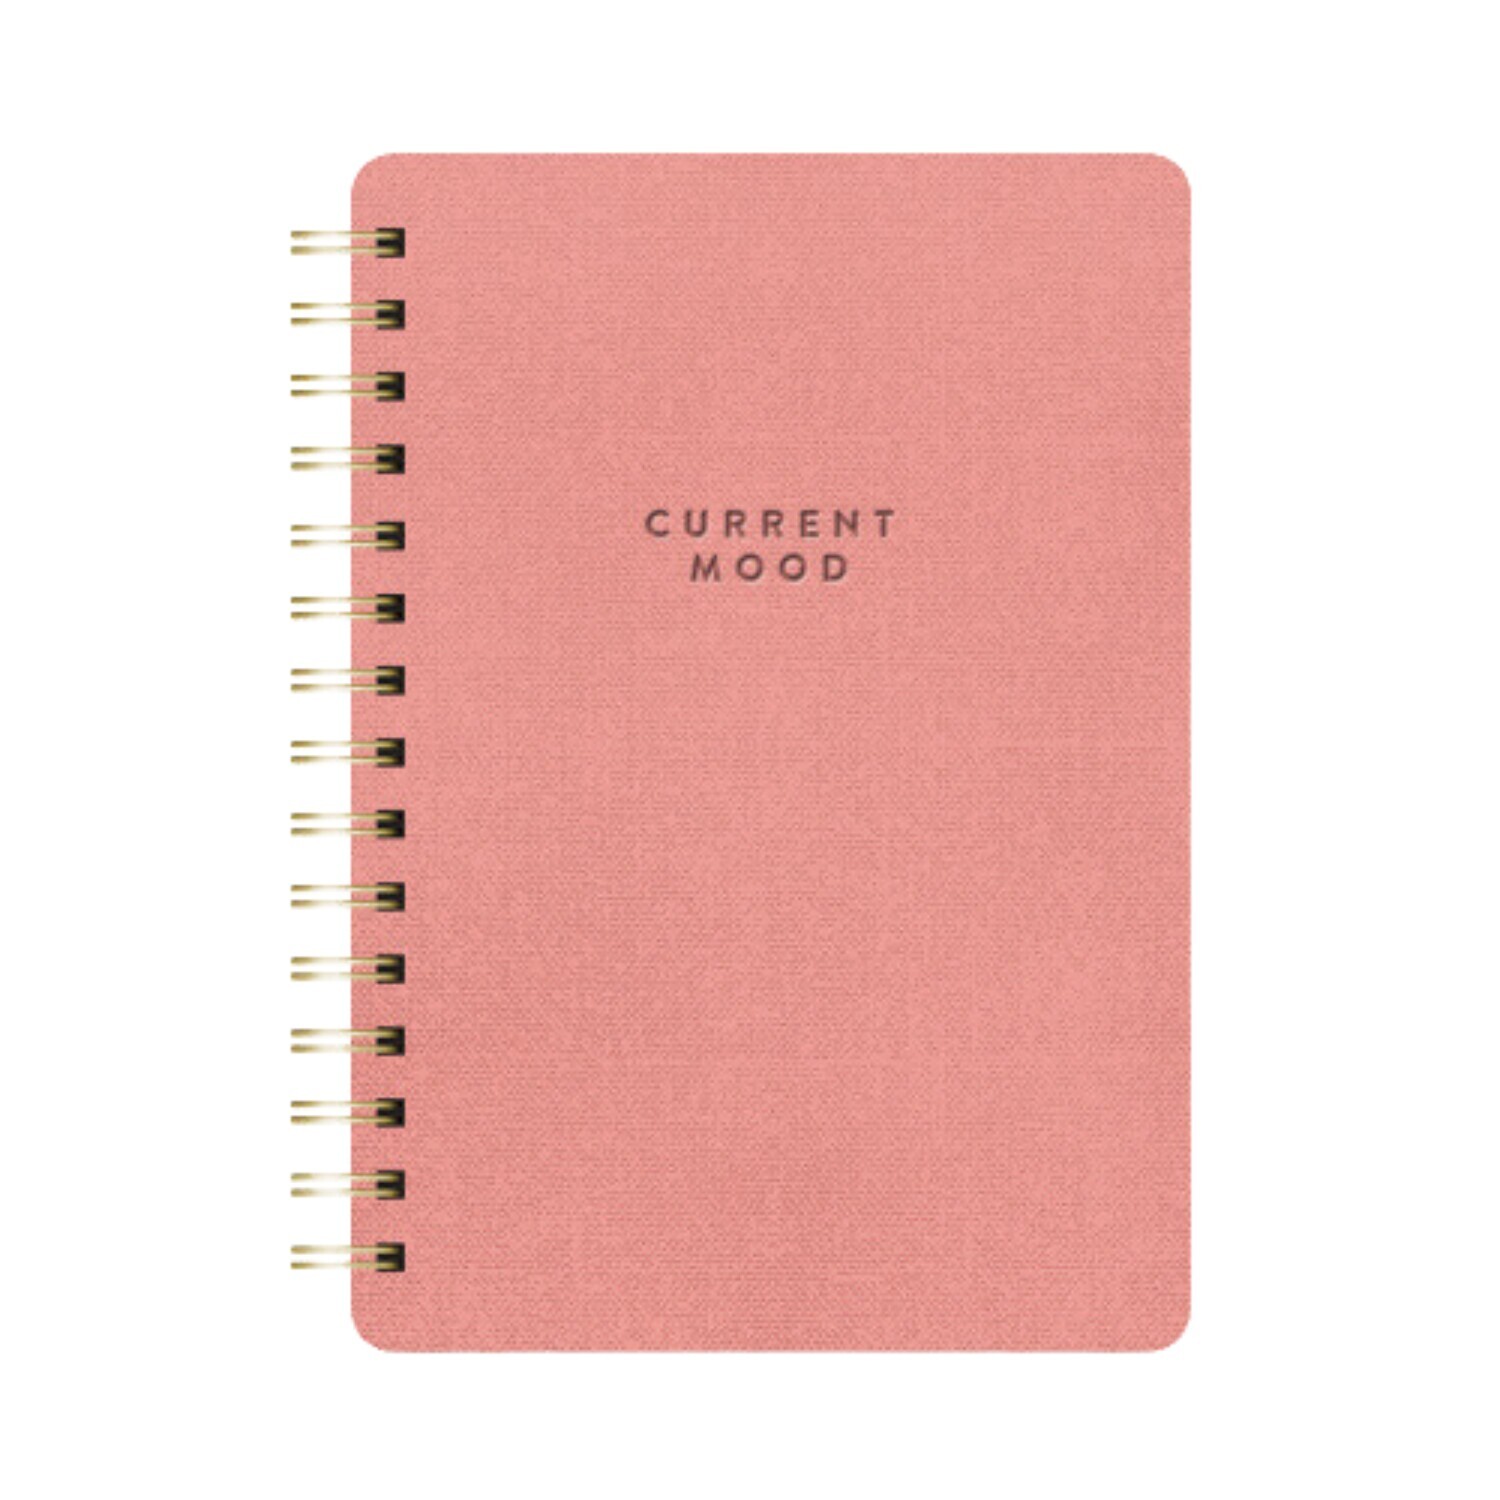 CURRENT MOOD NOTEBOOK